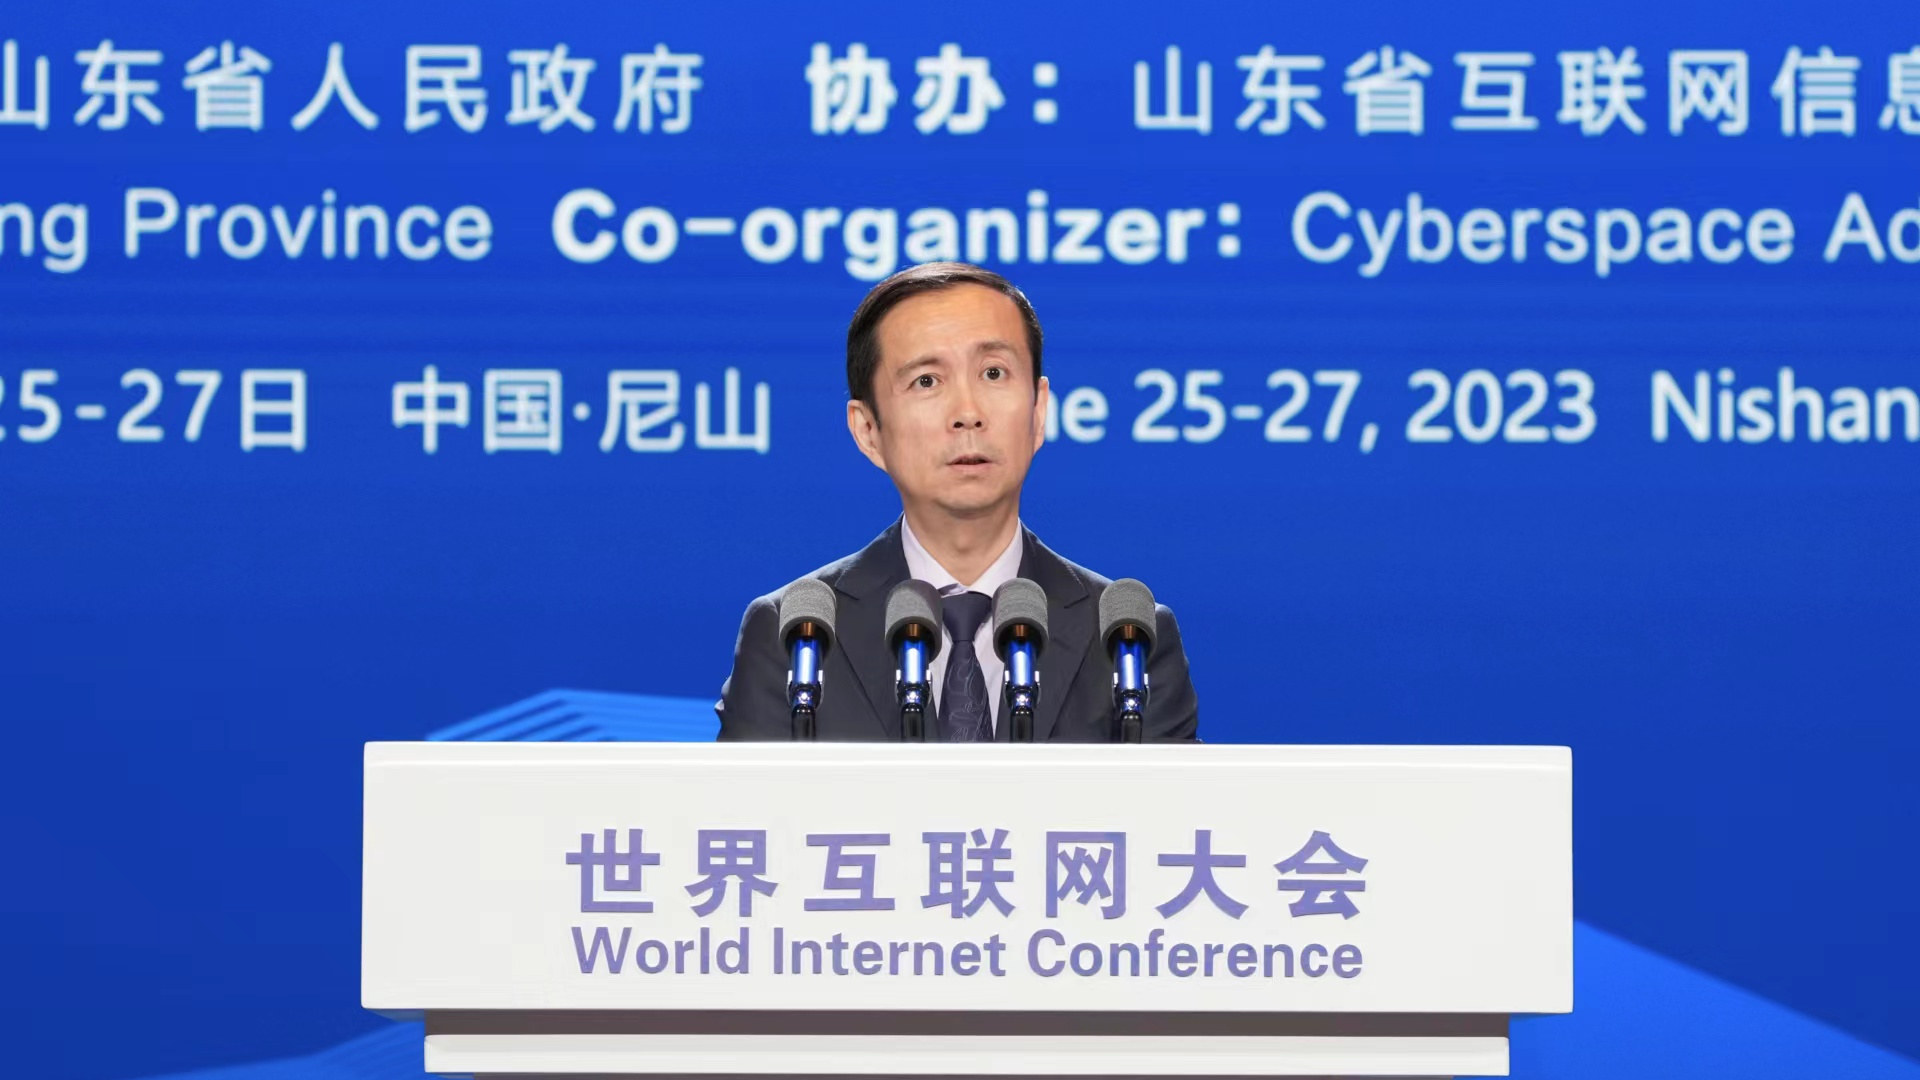 Zhang Yong, chairman and CEO of Alibaba Group, addresses the World Internet Conference Nishan Dialogue on Digital Civilization in Qufu, east China's Shandong Province, June 26, 2023. /WIC